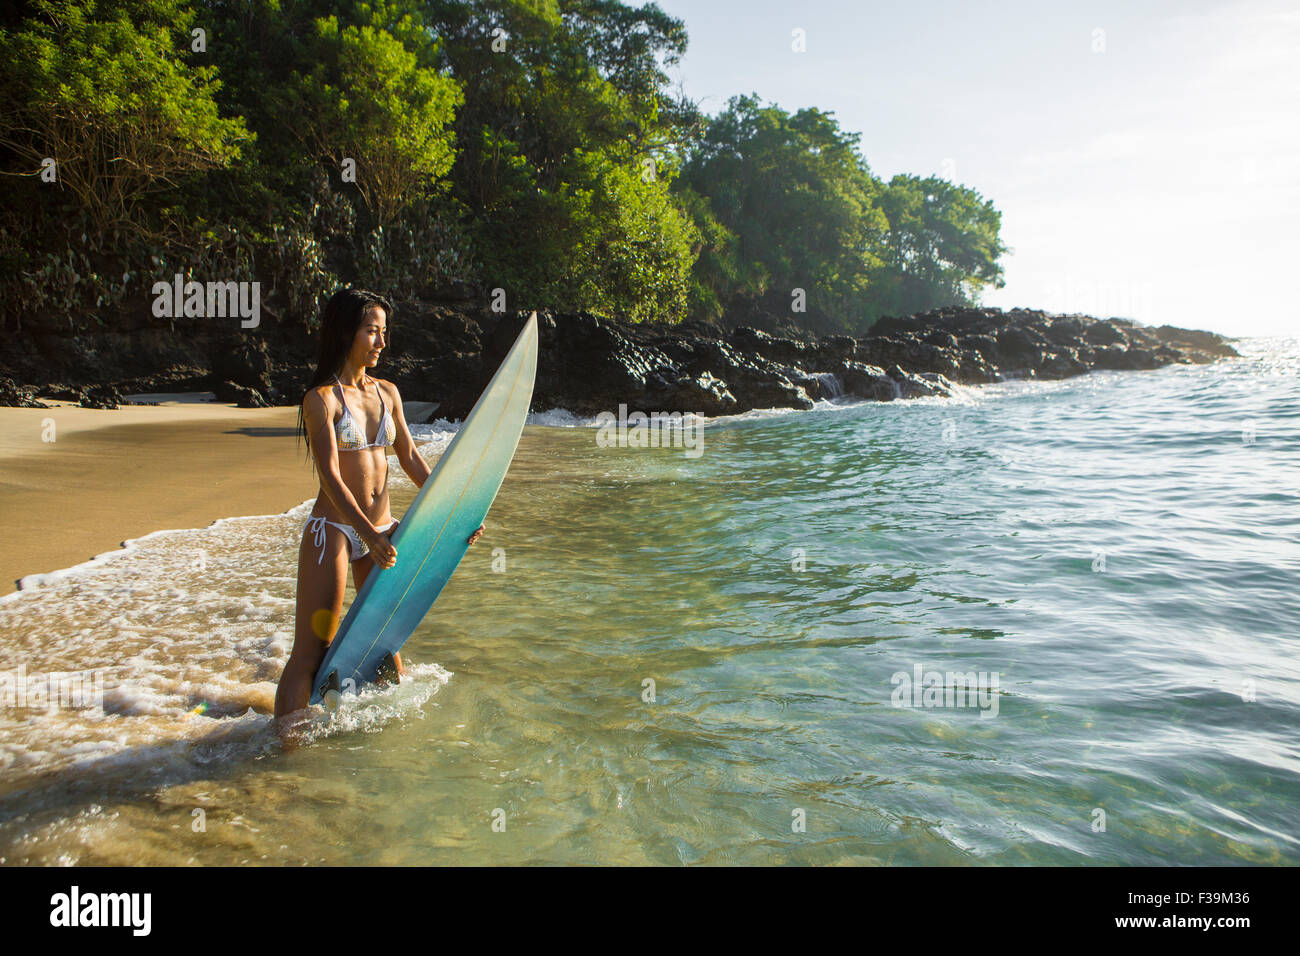 Woman standing in the surf holding her surfboard, Bali, Indonesia Stock Photo